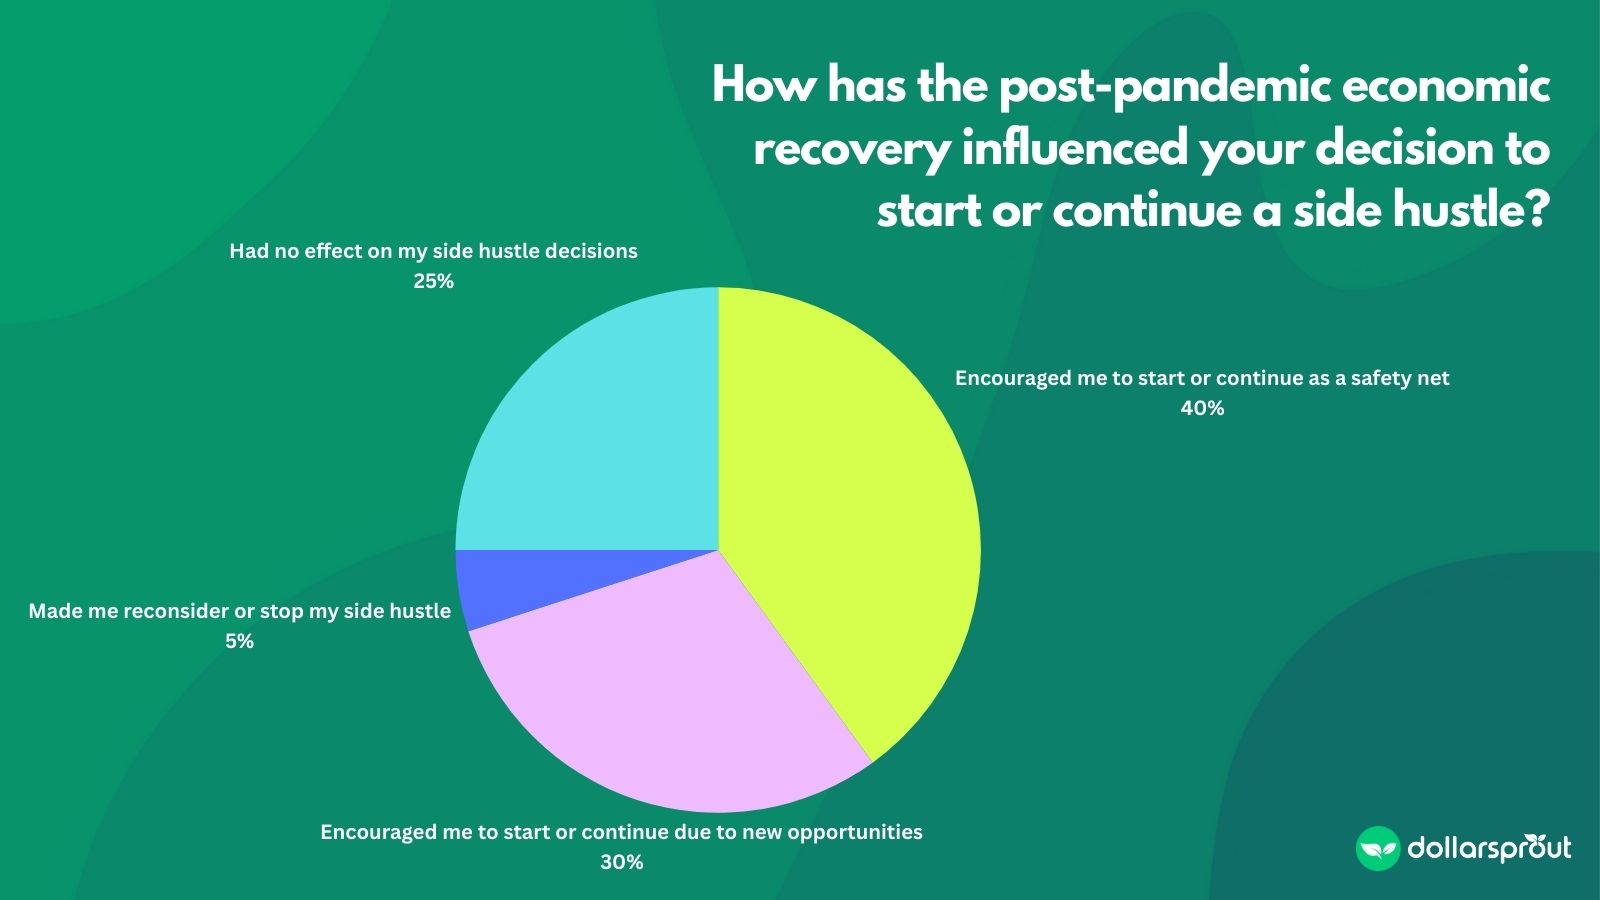 Pie chart showing how the post-pandemic recovery has shifted their mindset on side hustling.